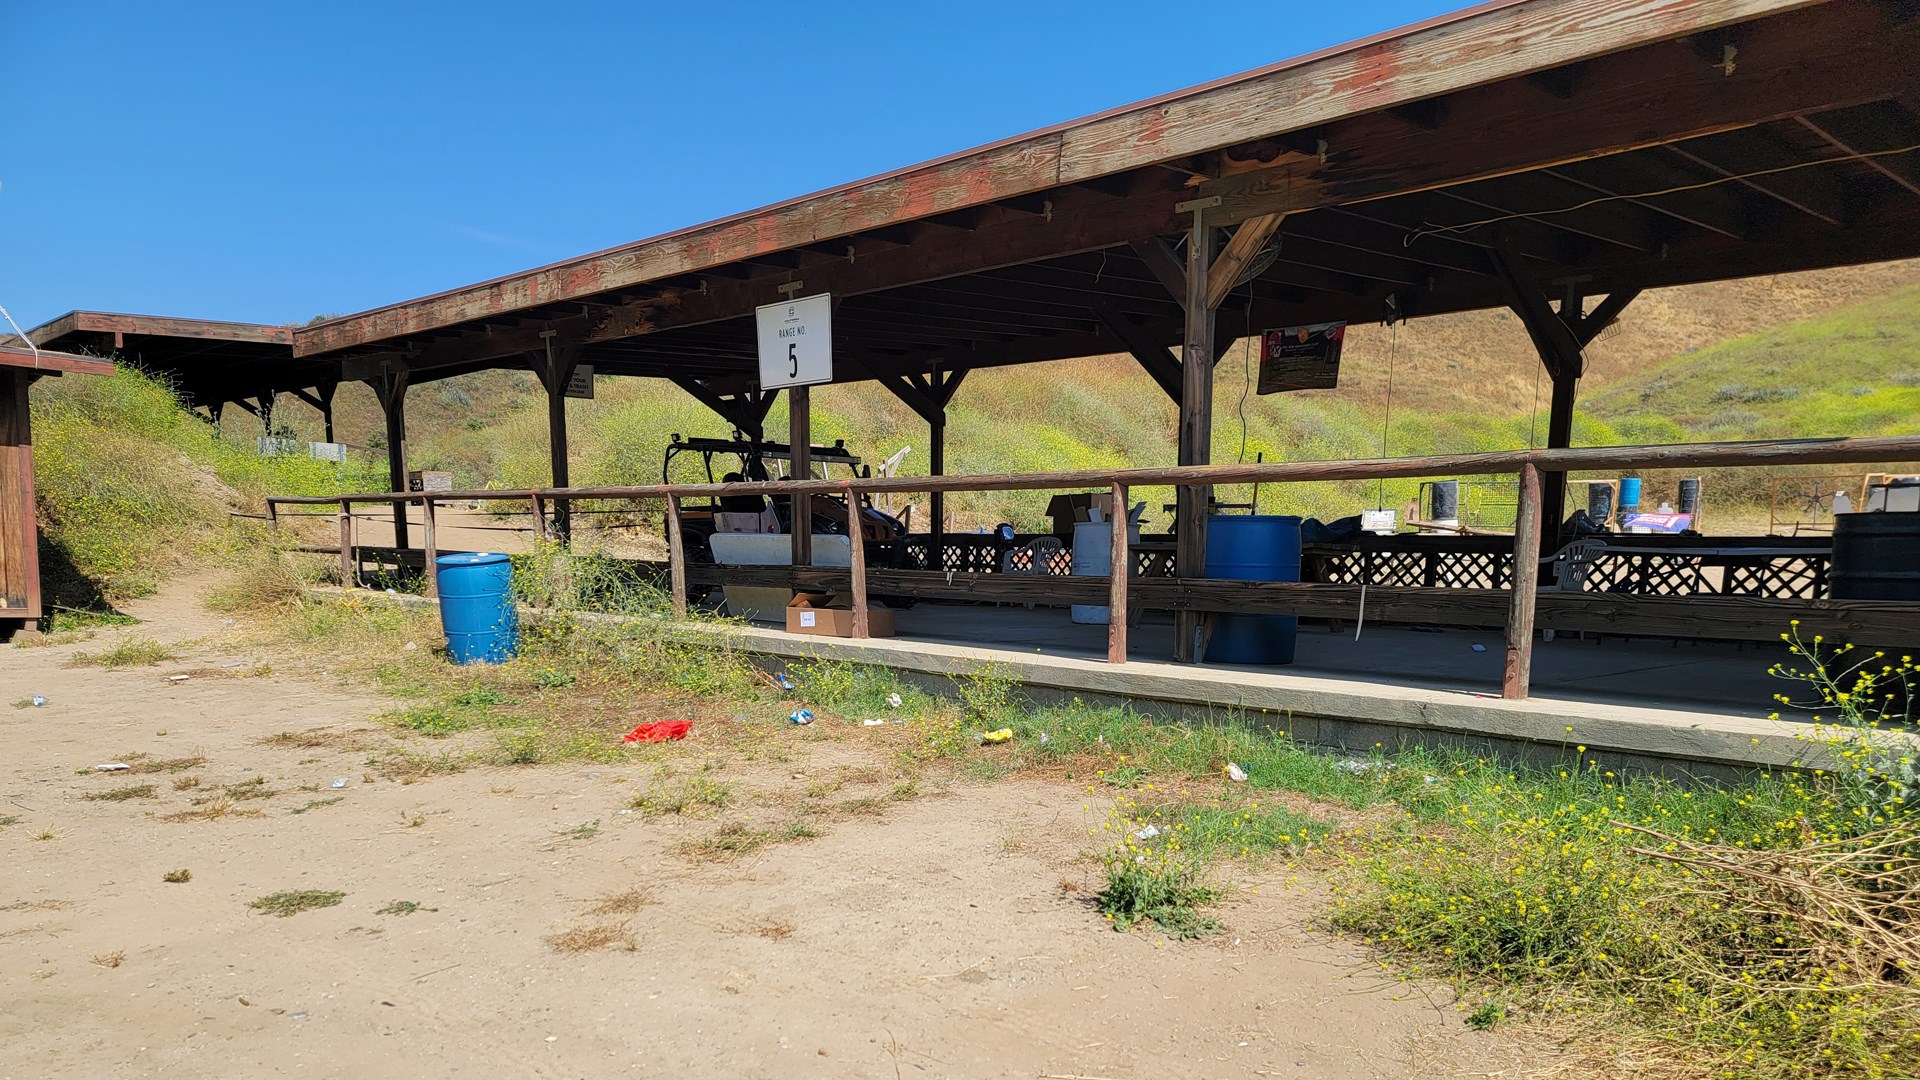 Outdoor shoooting range covered benches facility mountain backdrop wood blue barrels grass